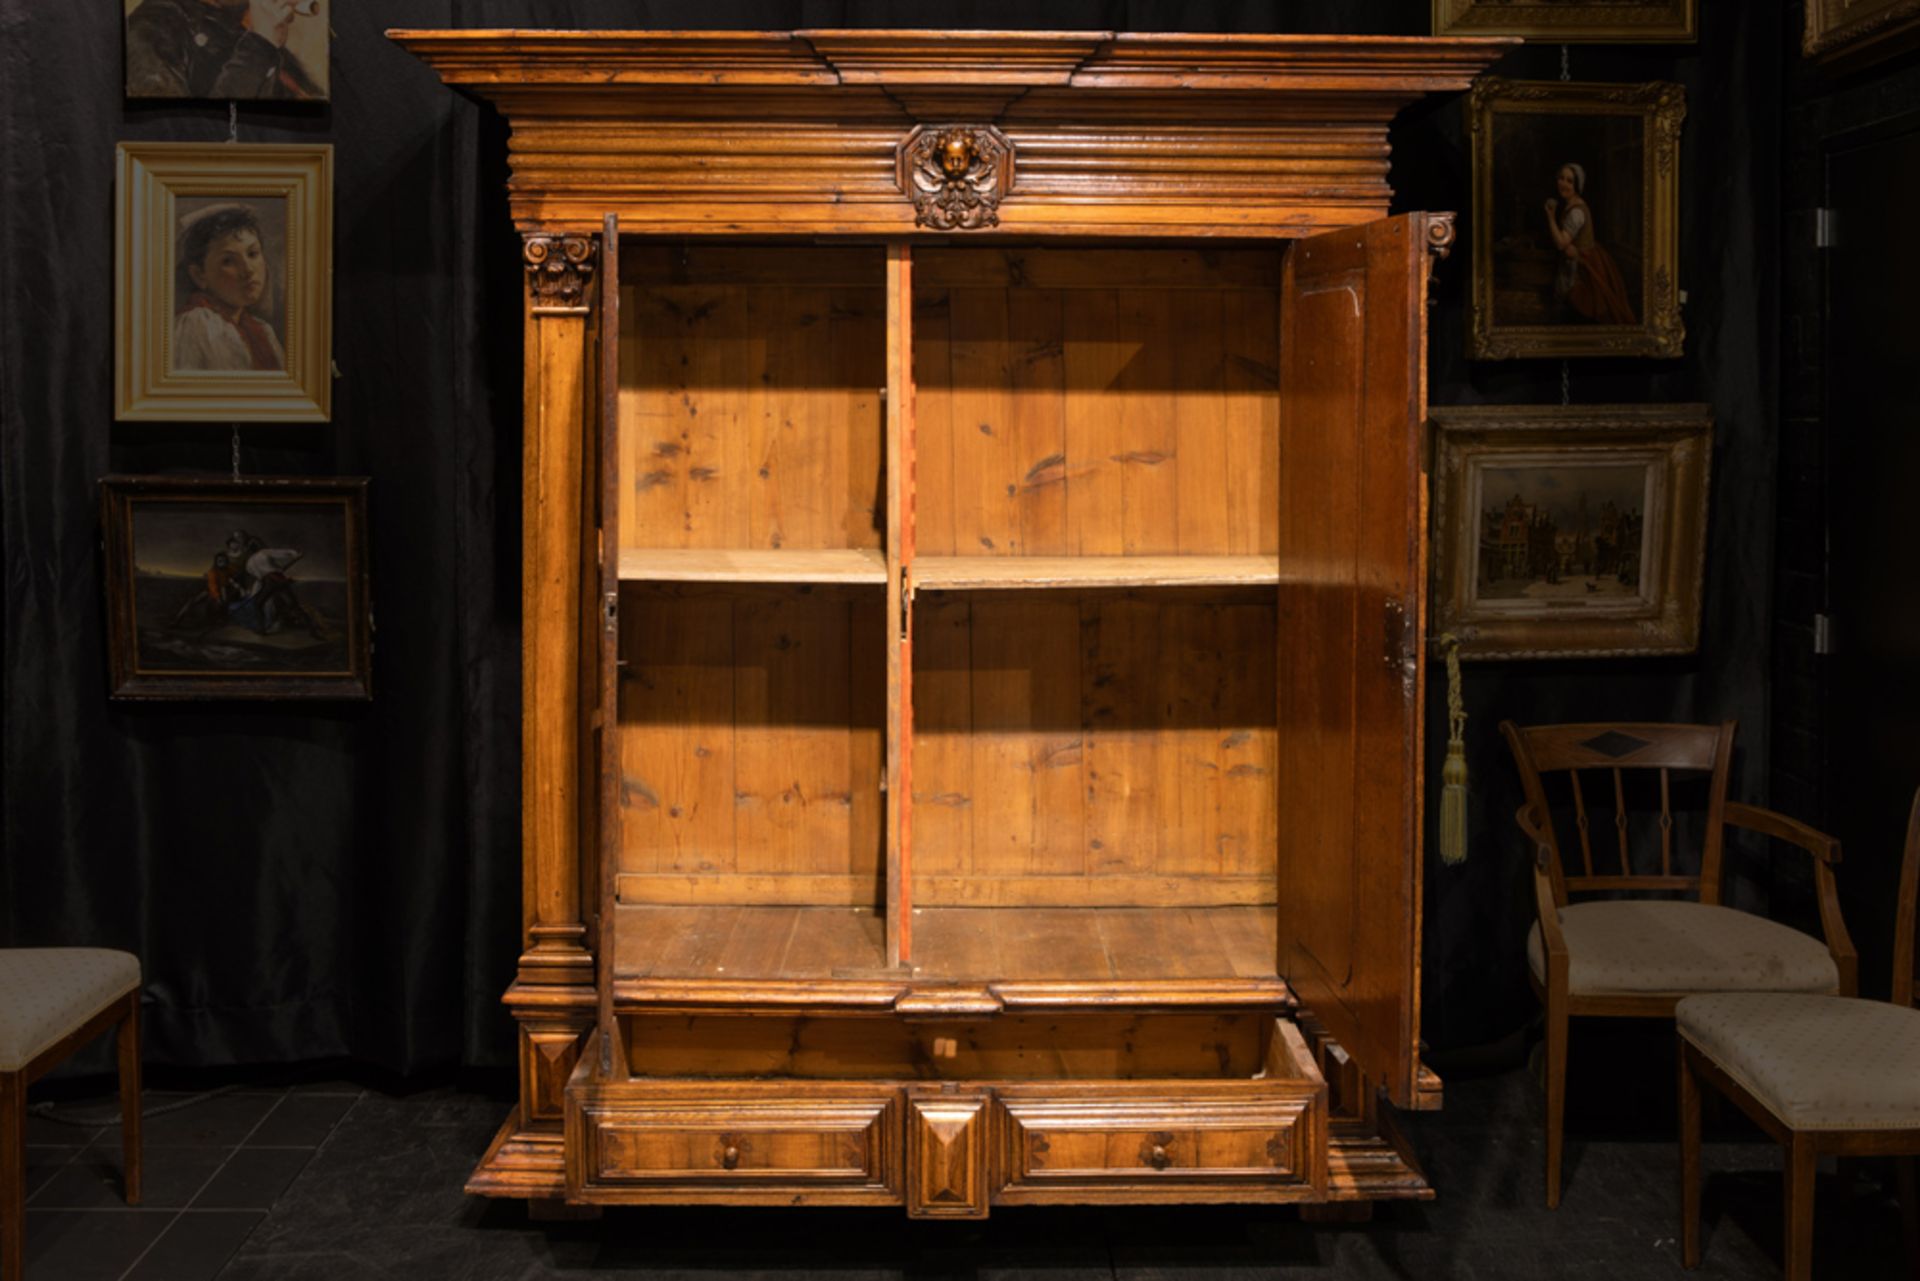 beautiful 17th/18th Cent. German baroque style armoire with a strong architectural design with - Image 2 of 3